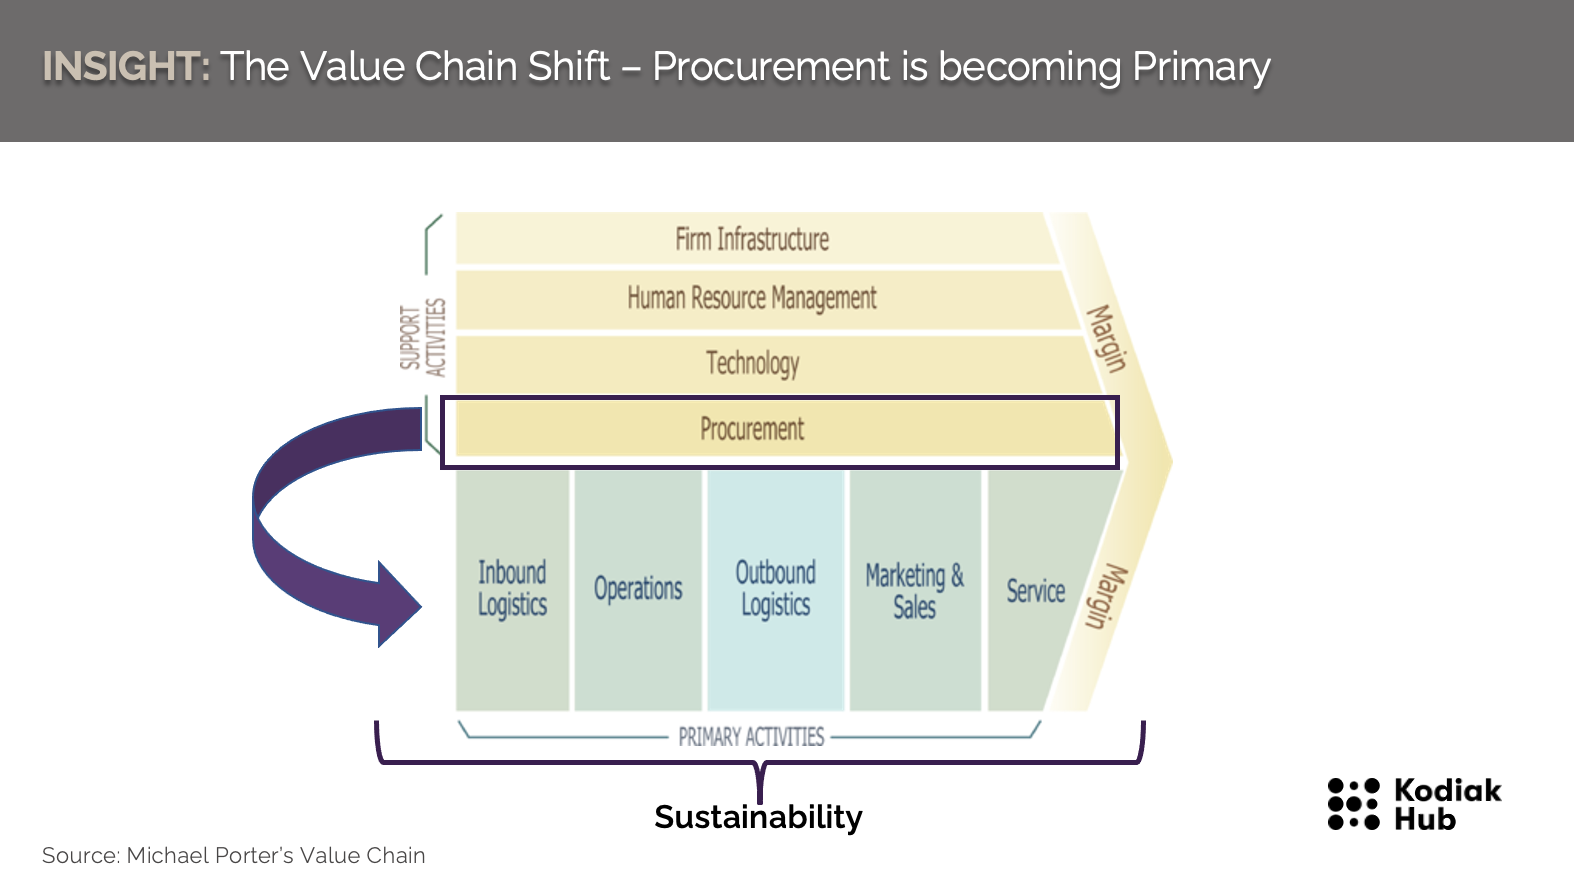 Procurement is becoming Primary - Value Chain Shift